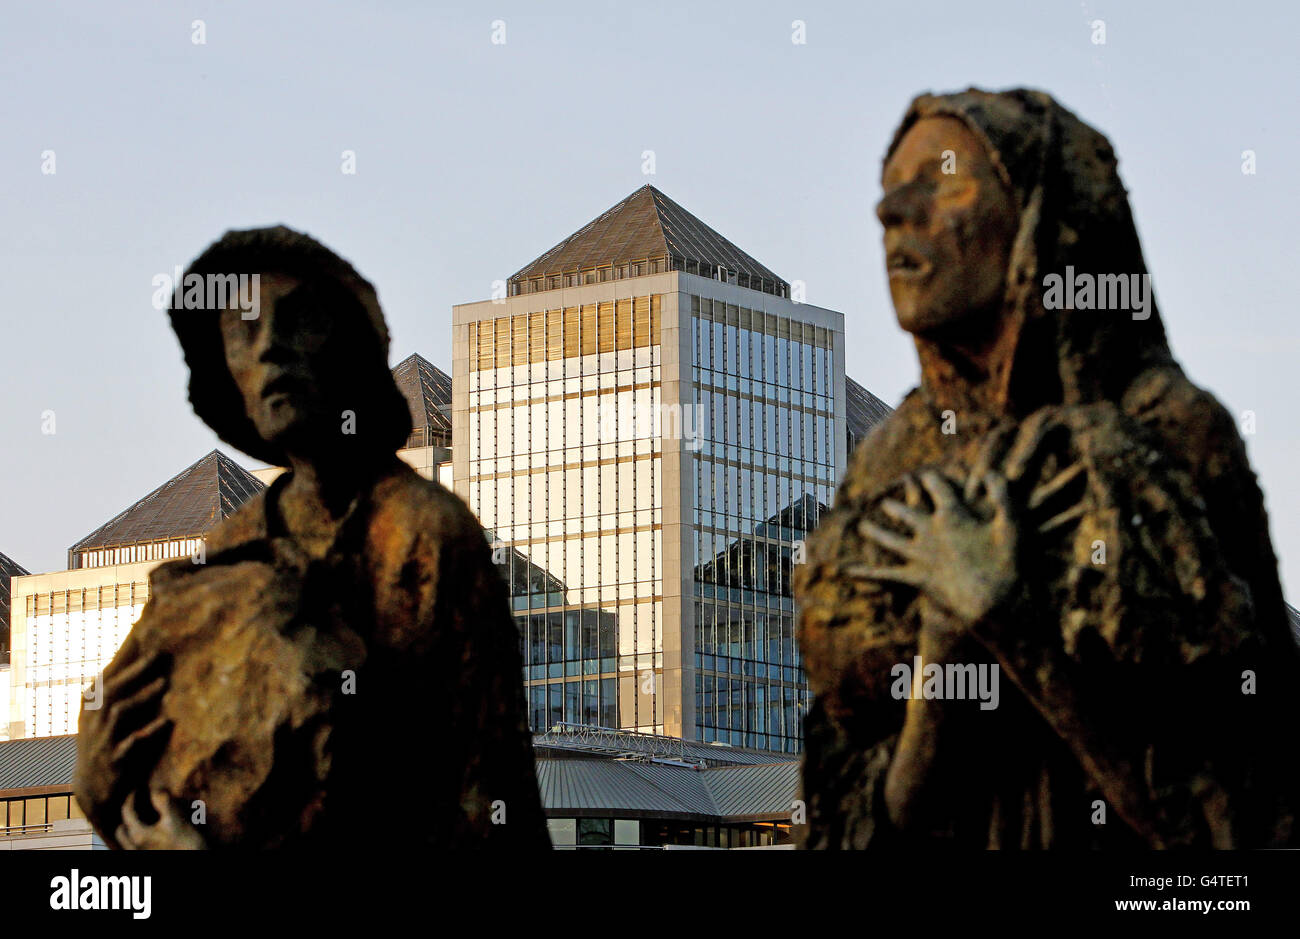 A general view of the Ulster Bank Headquarters seen behind the Irish Famine memorial by artist Rowan Gillespie in Dublin city centre as the bank is expected to announce up to 900 job losses in the Republic of Ireland and Northern Ireland today as part of massive cutbacks at its parent company. Stock Photo